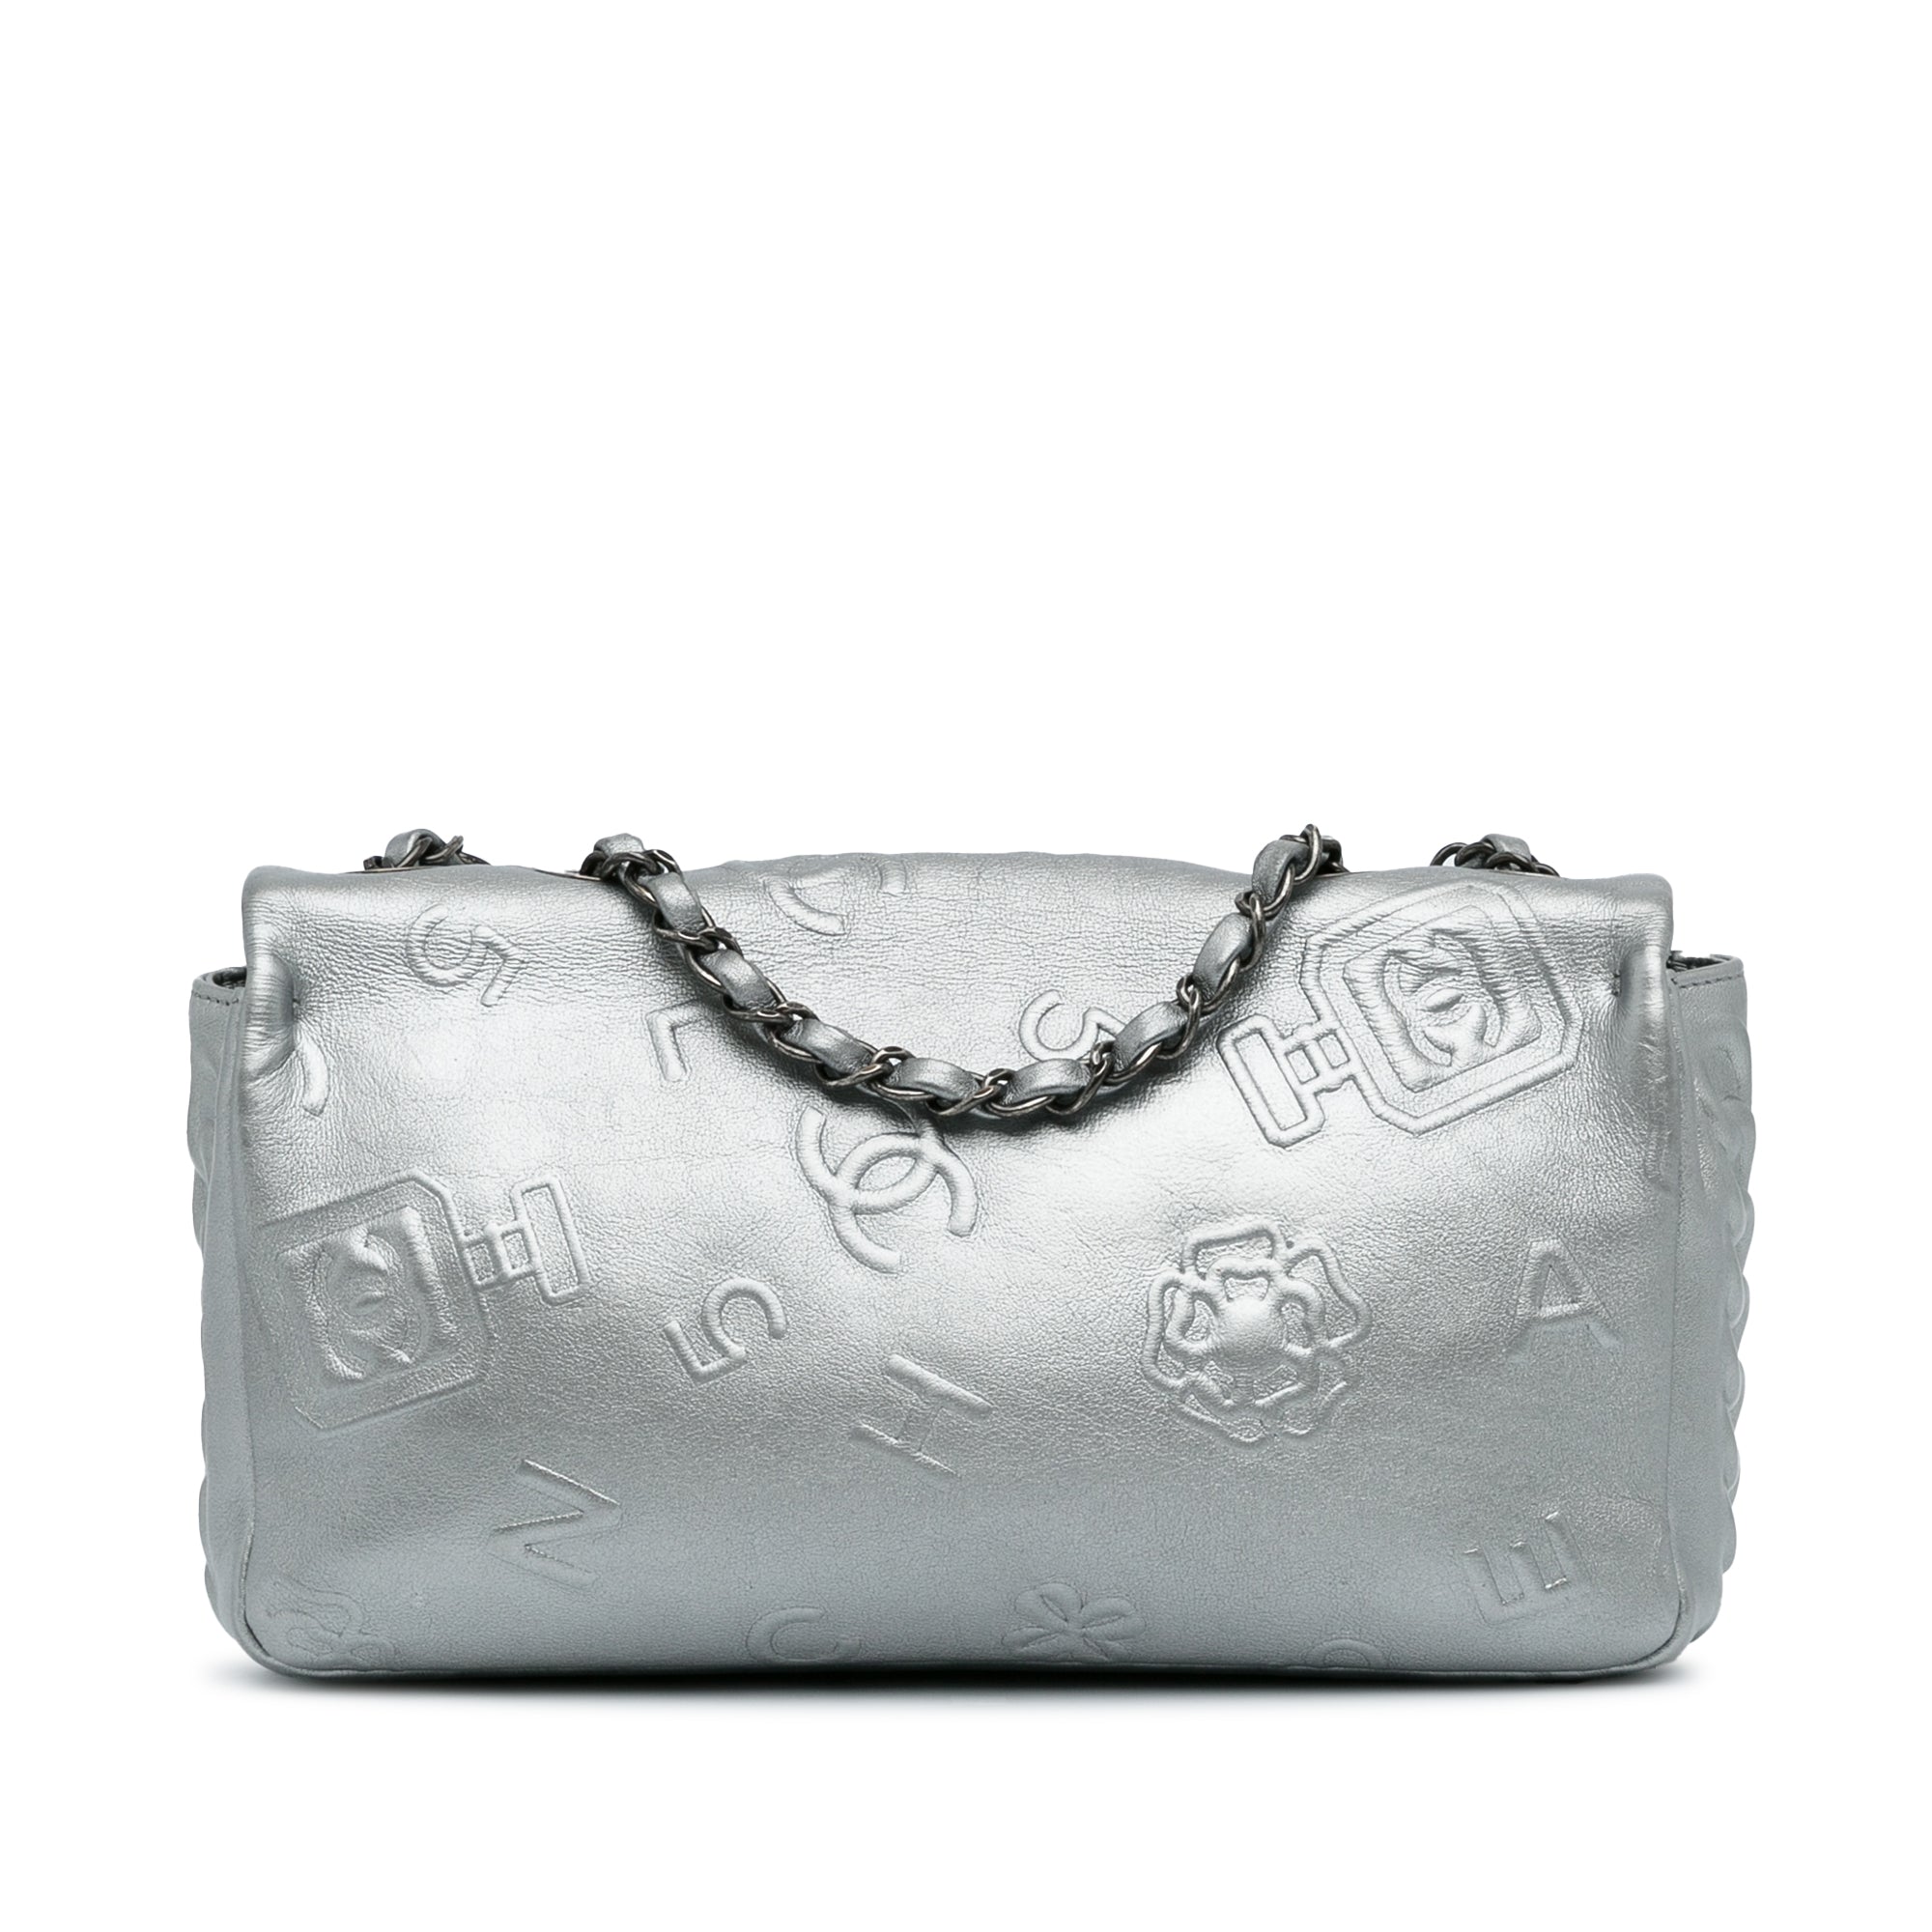 Chanel Lucky Charms Flap Bag